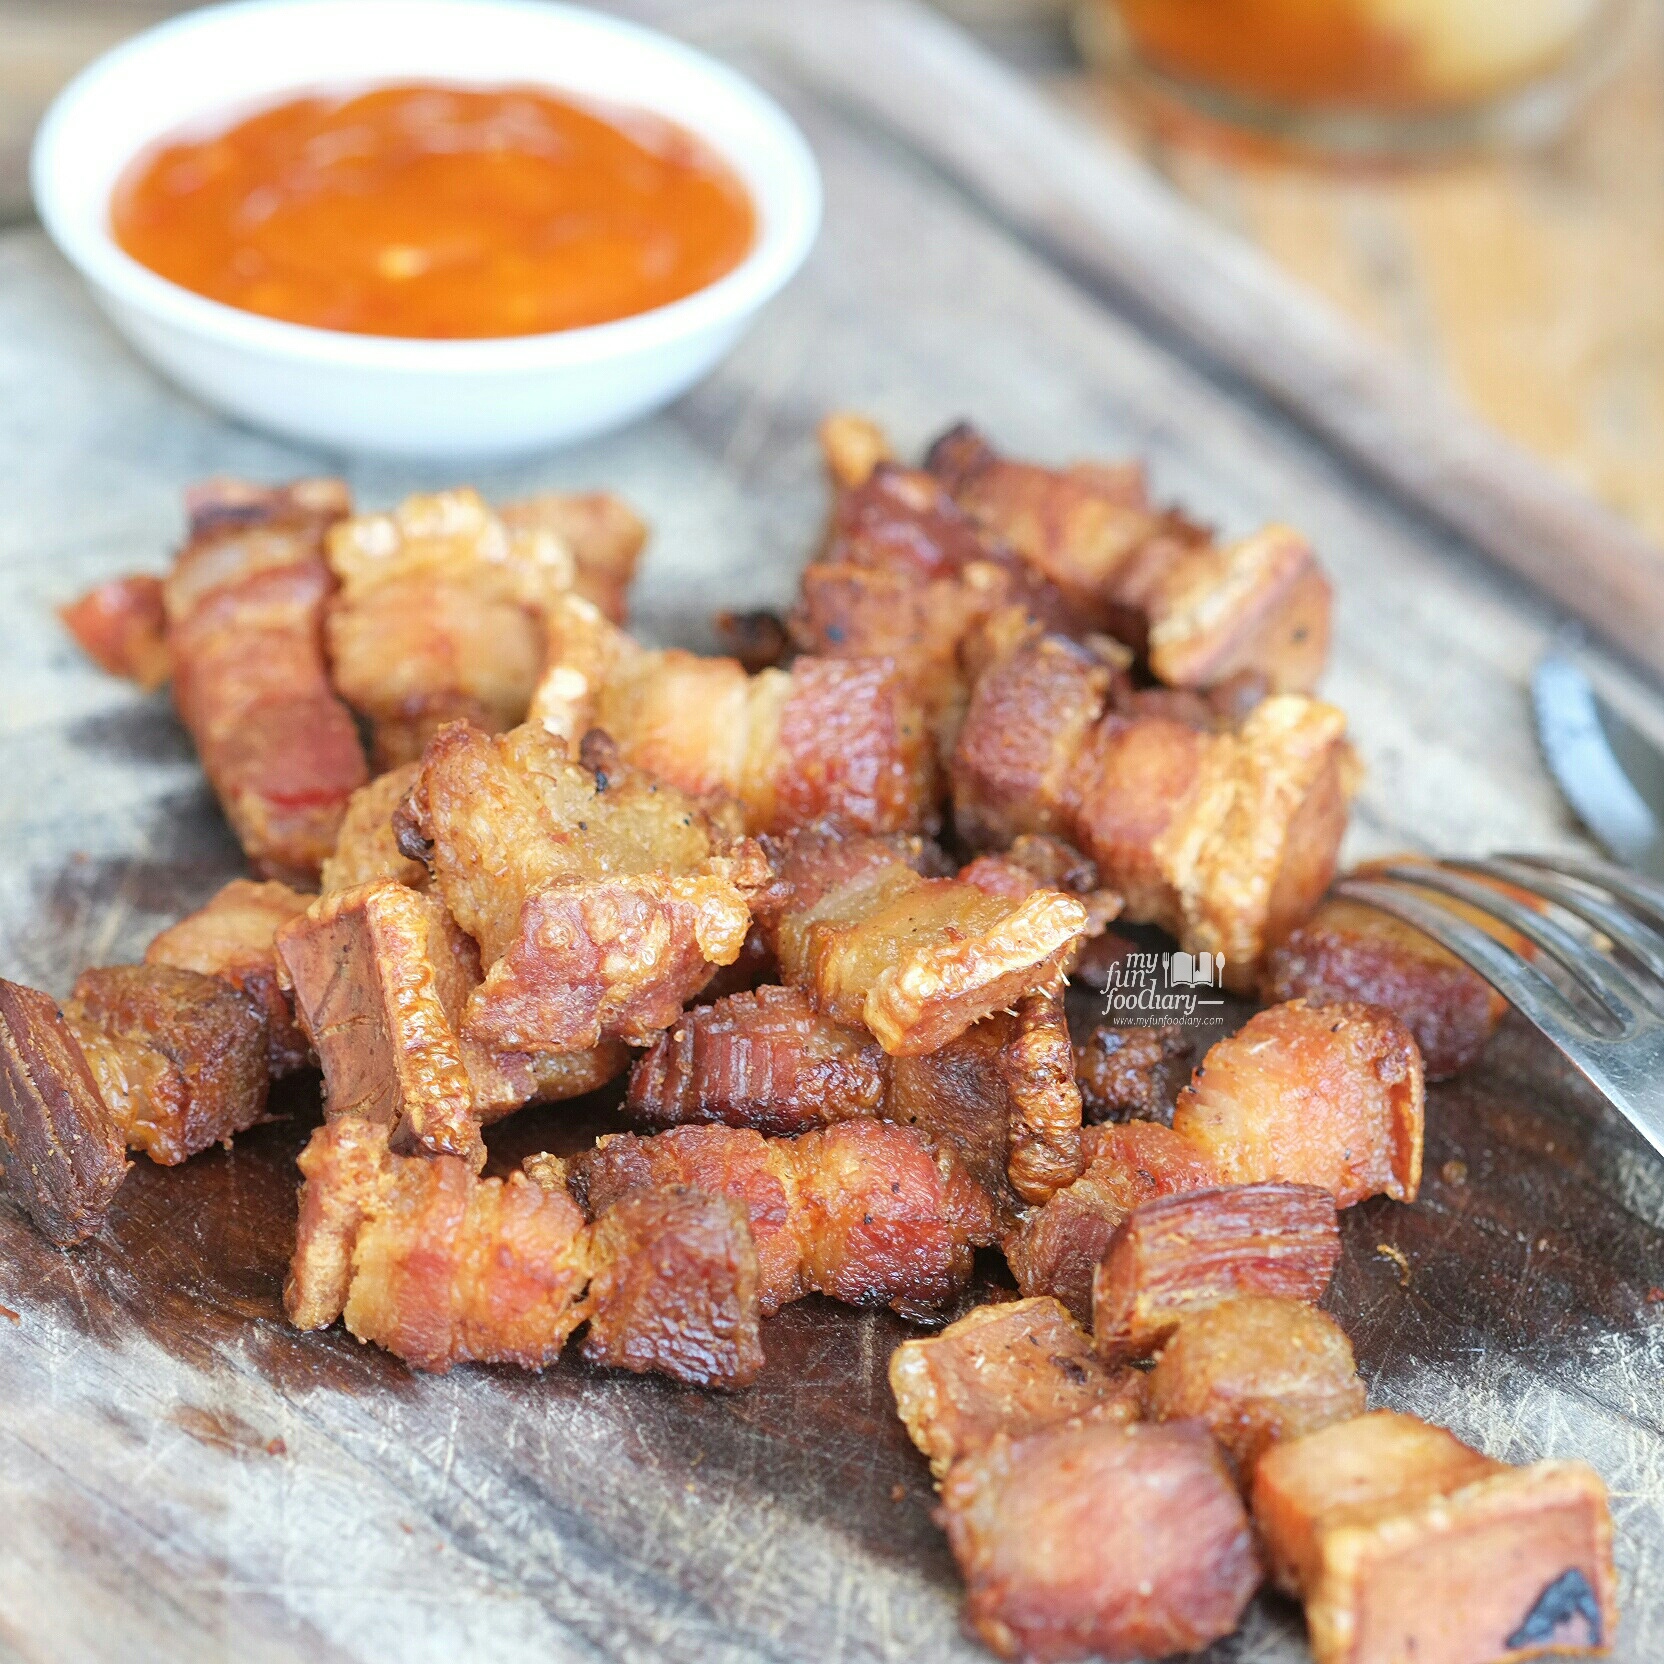 Crispy Pork Belly at Eat Well Bali by Myfunfoodiary 03